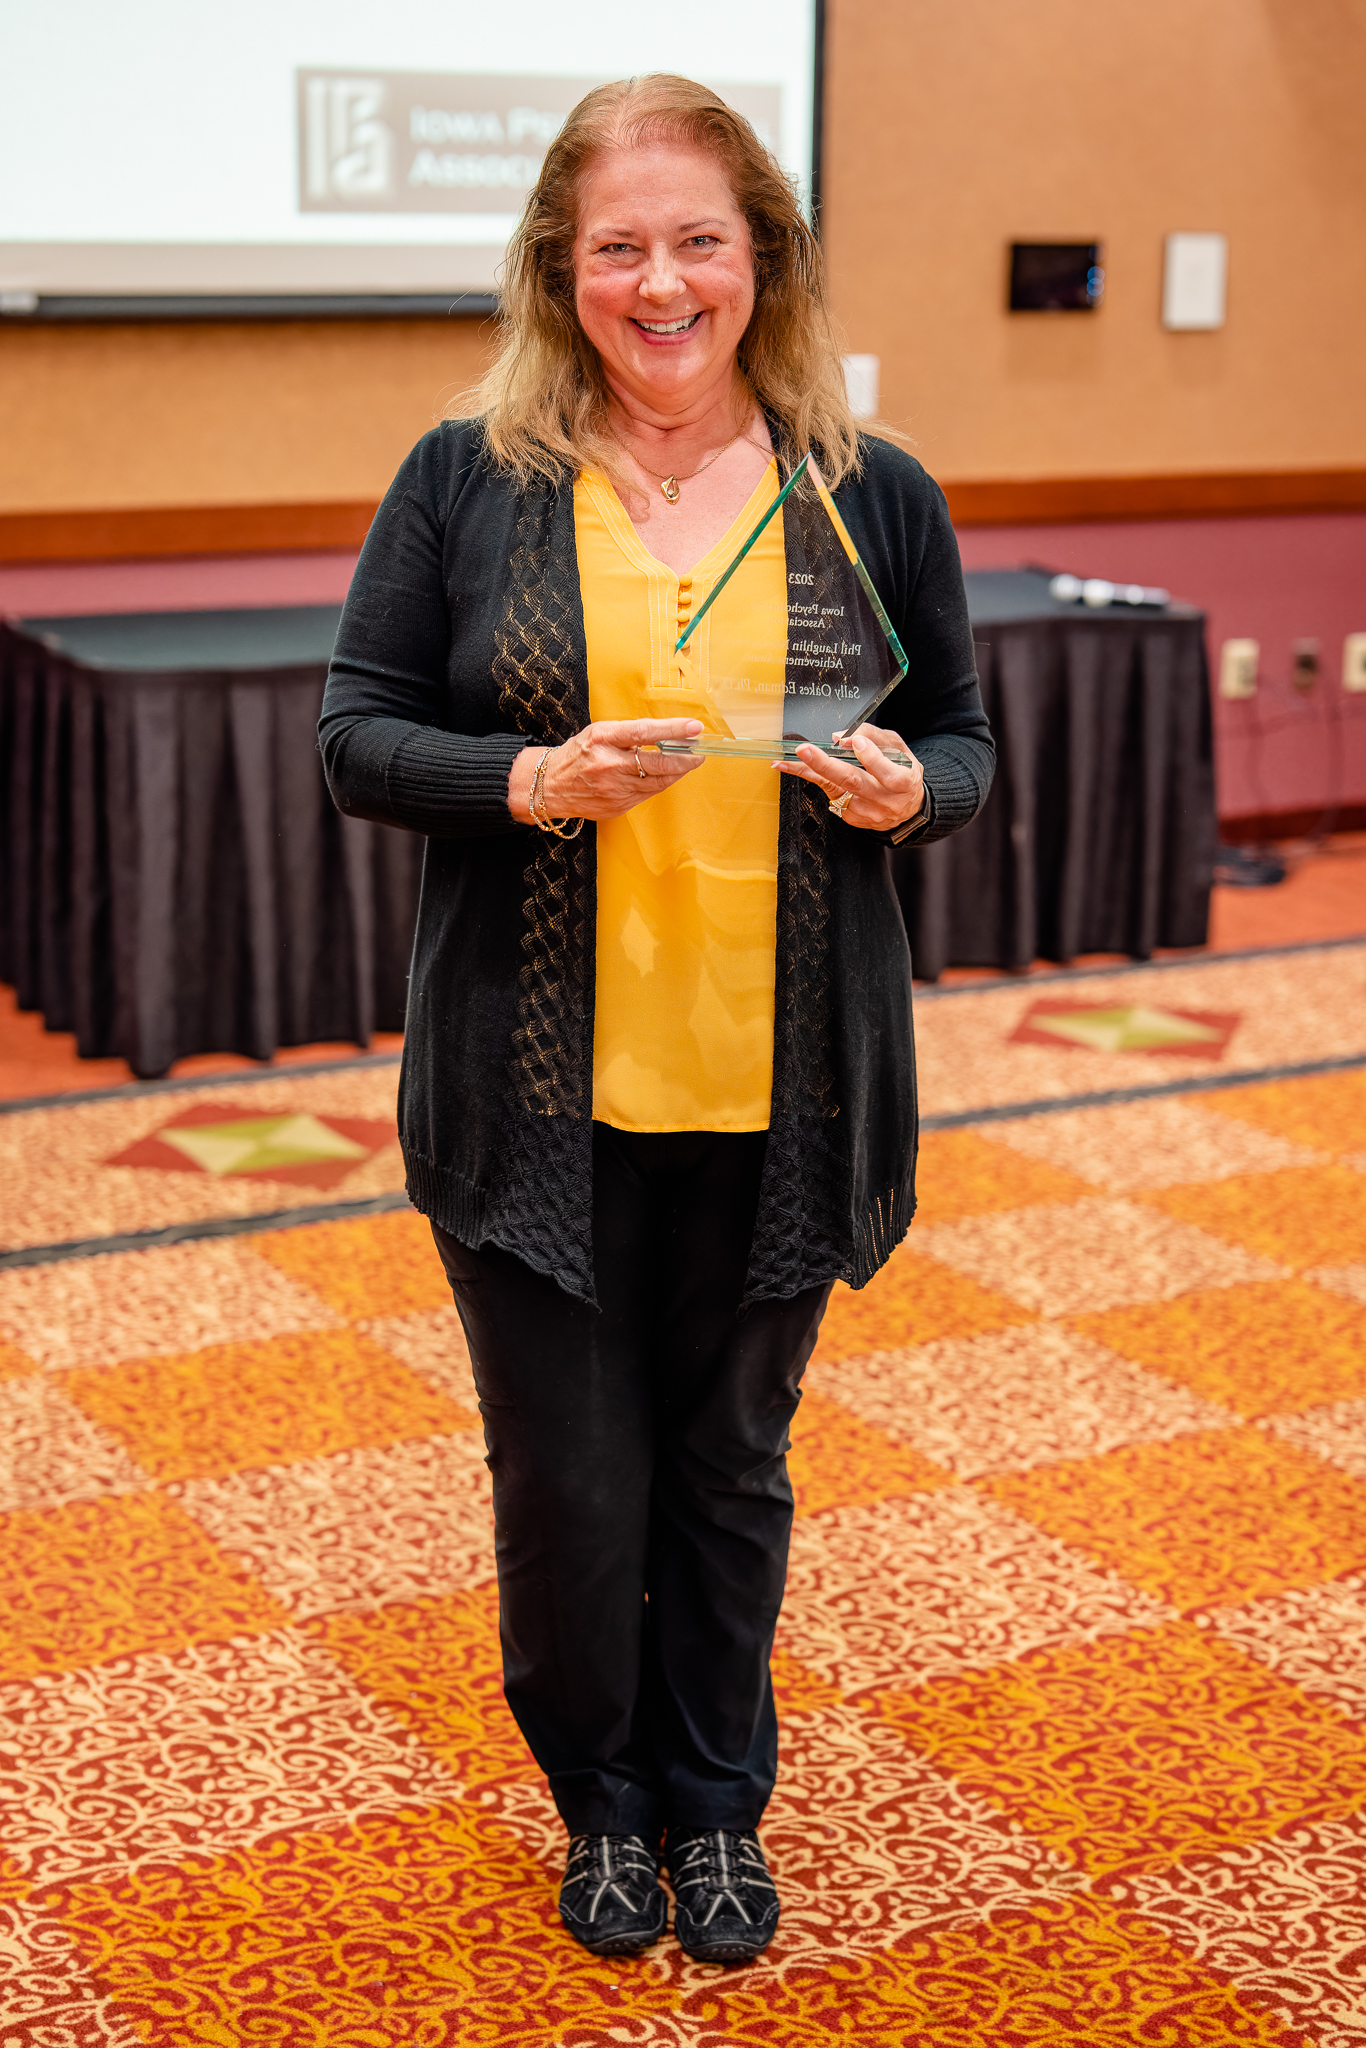 Dr. Oakes Edman with her award